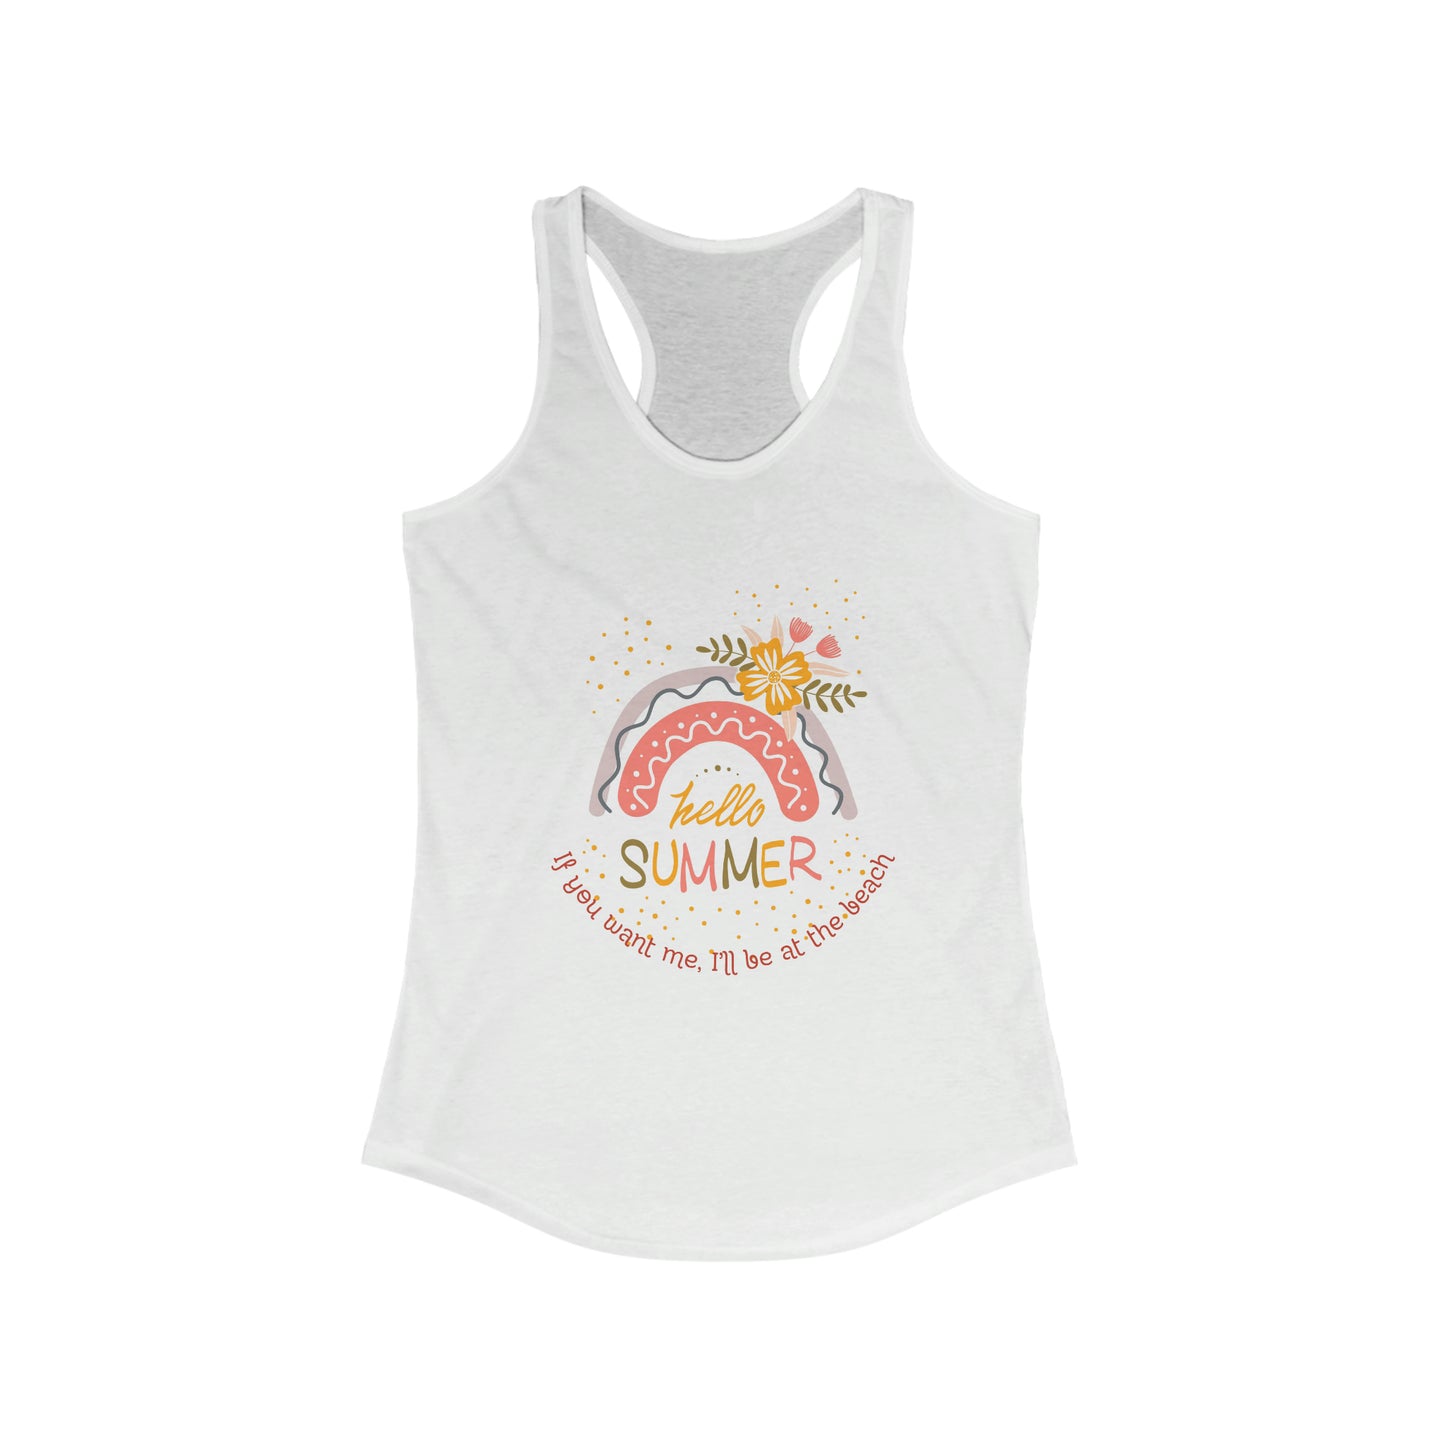 ‘If you want me, I’ll be at the beach’ Printed Front & Back. Women's Ideal Racerback Tank